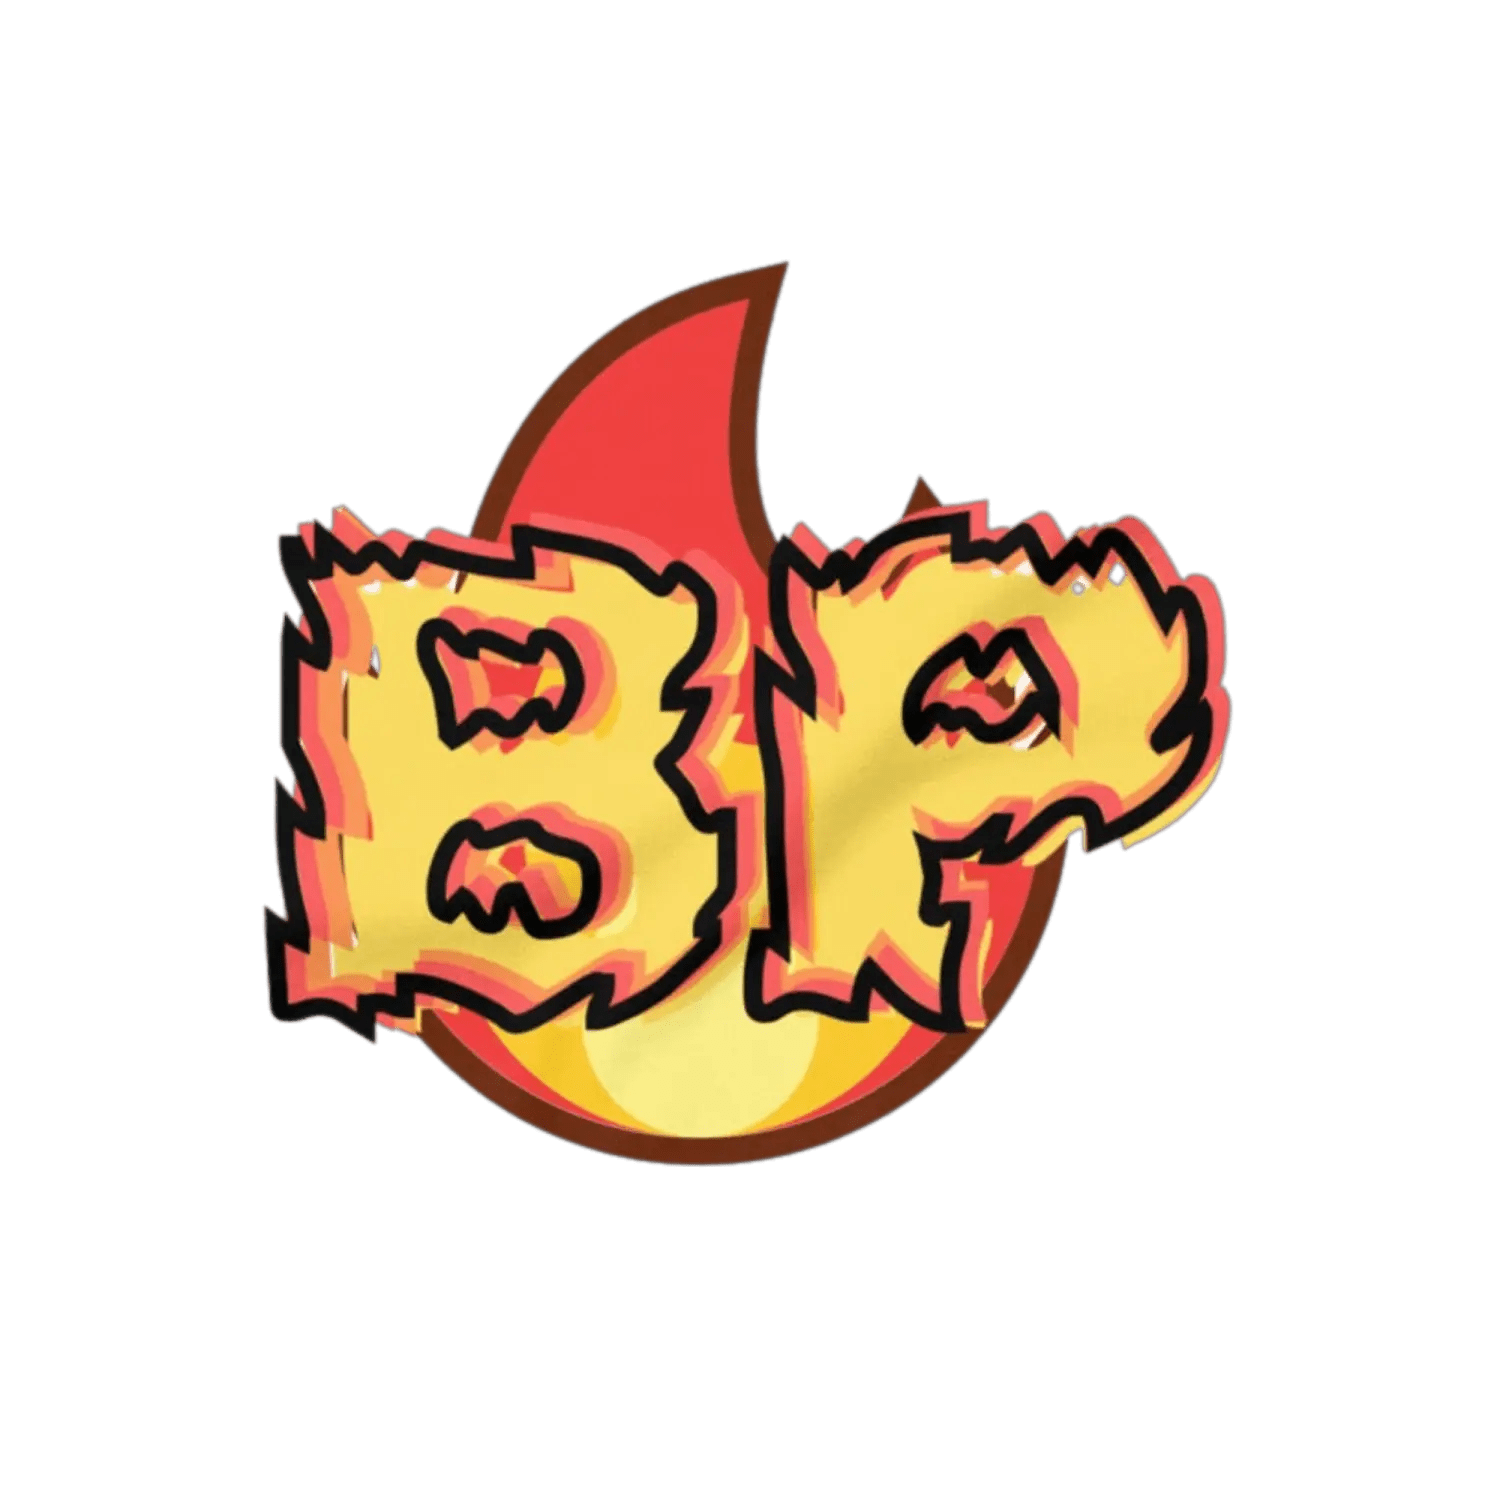 Fuel Your Fire - Bad Product